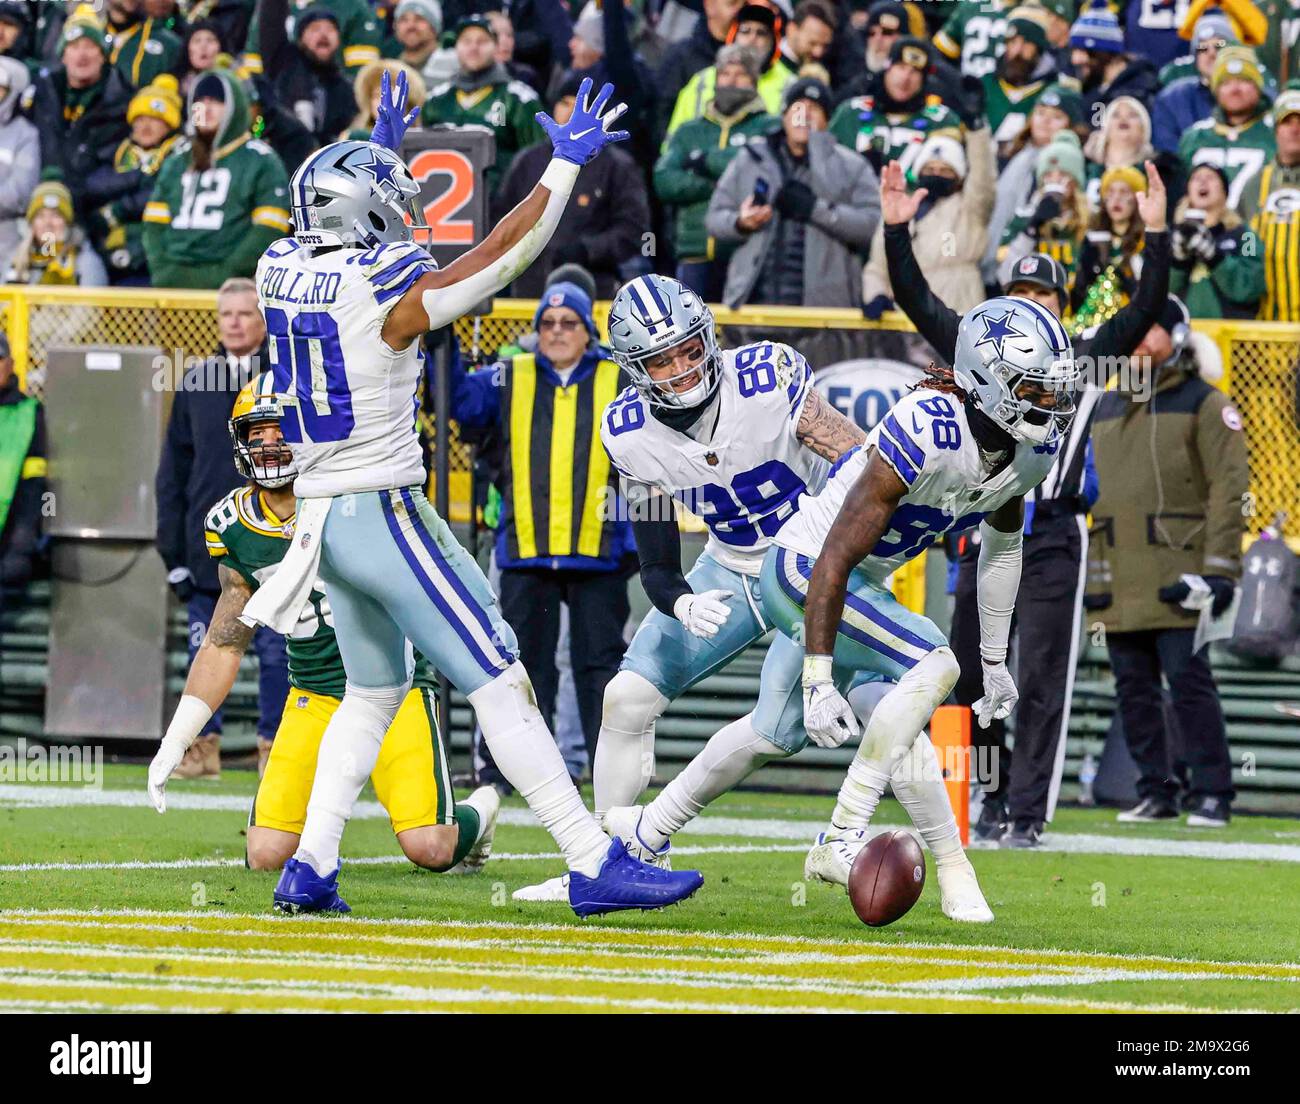 Dallas Cowboys wide receiver CeeDee Lamb (88)scores a touchdown against the  Green Bay Packers during an NFL football game Sunday, Nov. 13, 2022, in  Green Bay, Wis. (AP Photo/Jeffrey Phelps Stock Photo 